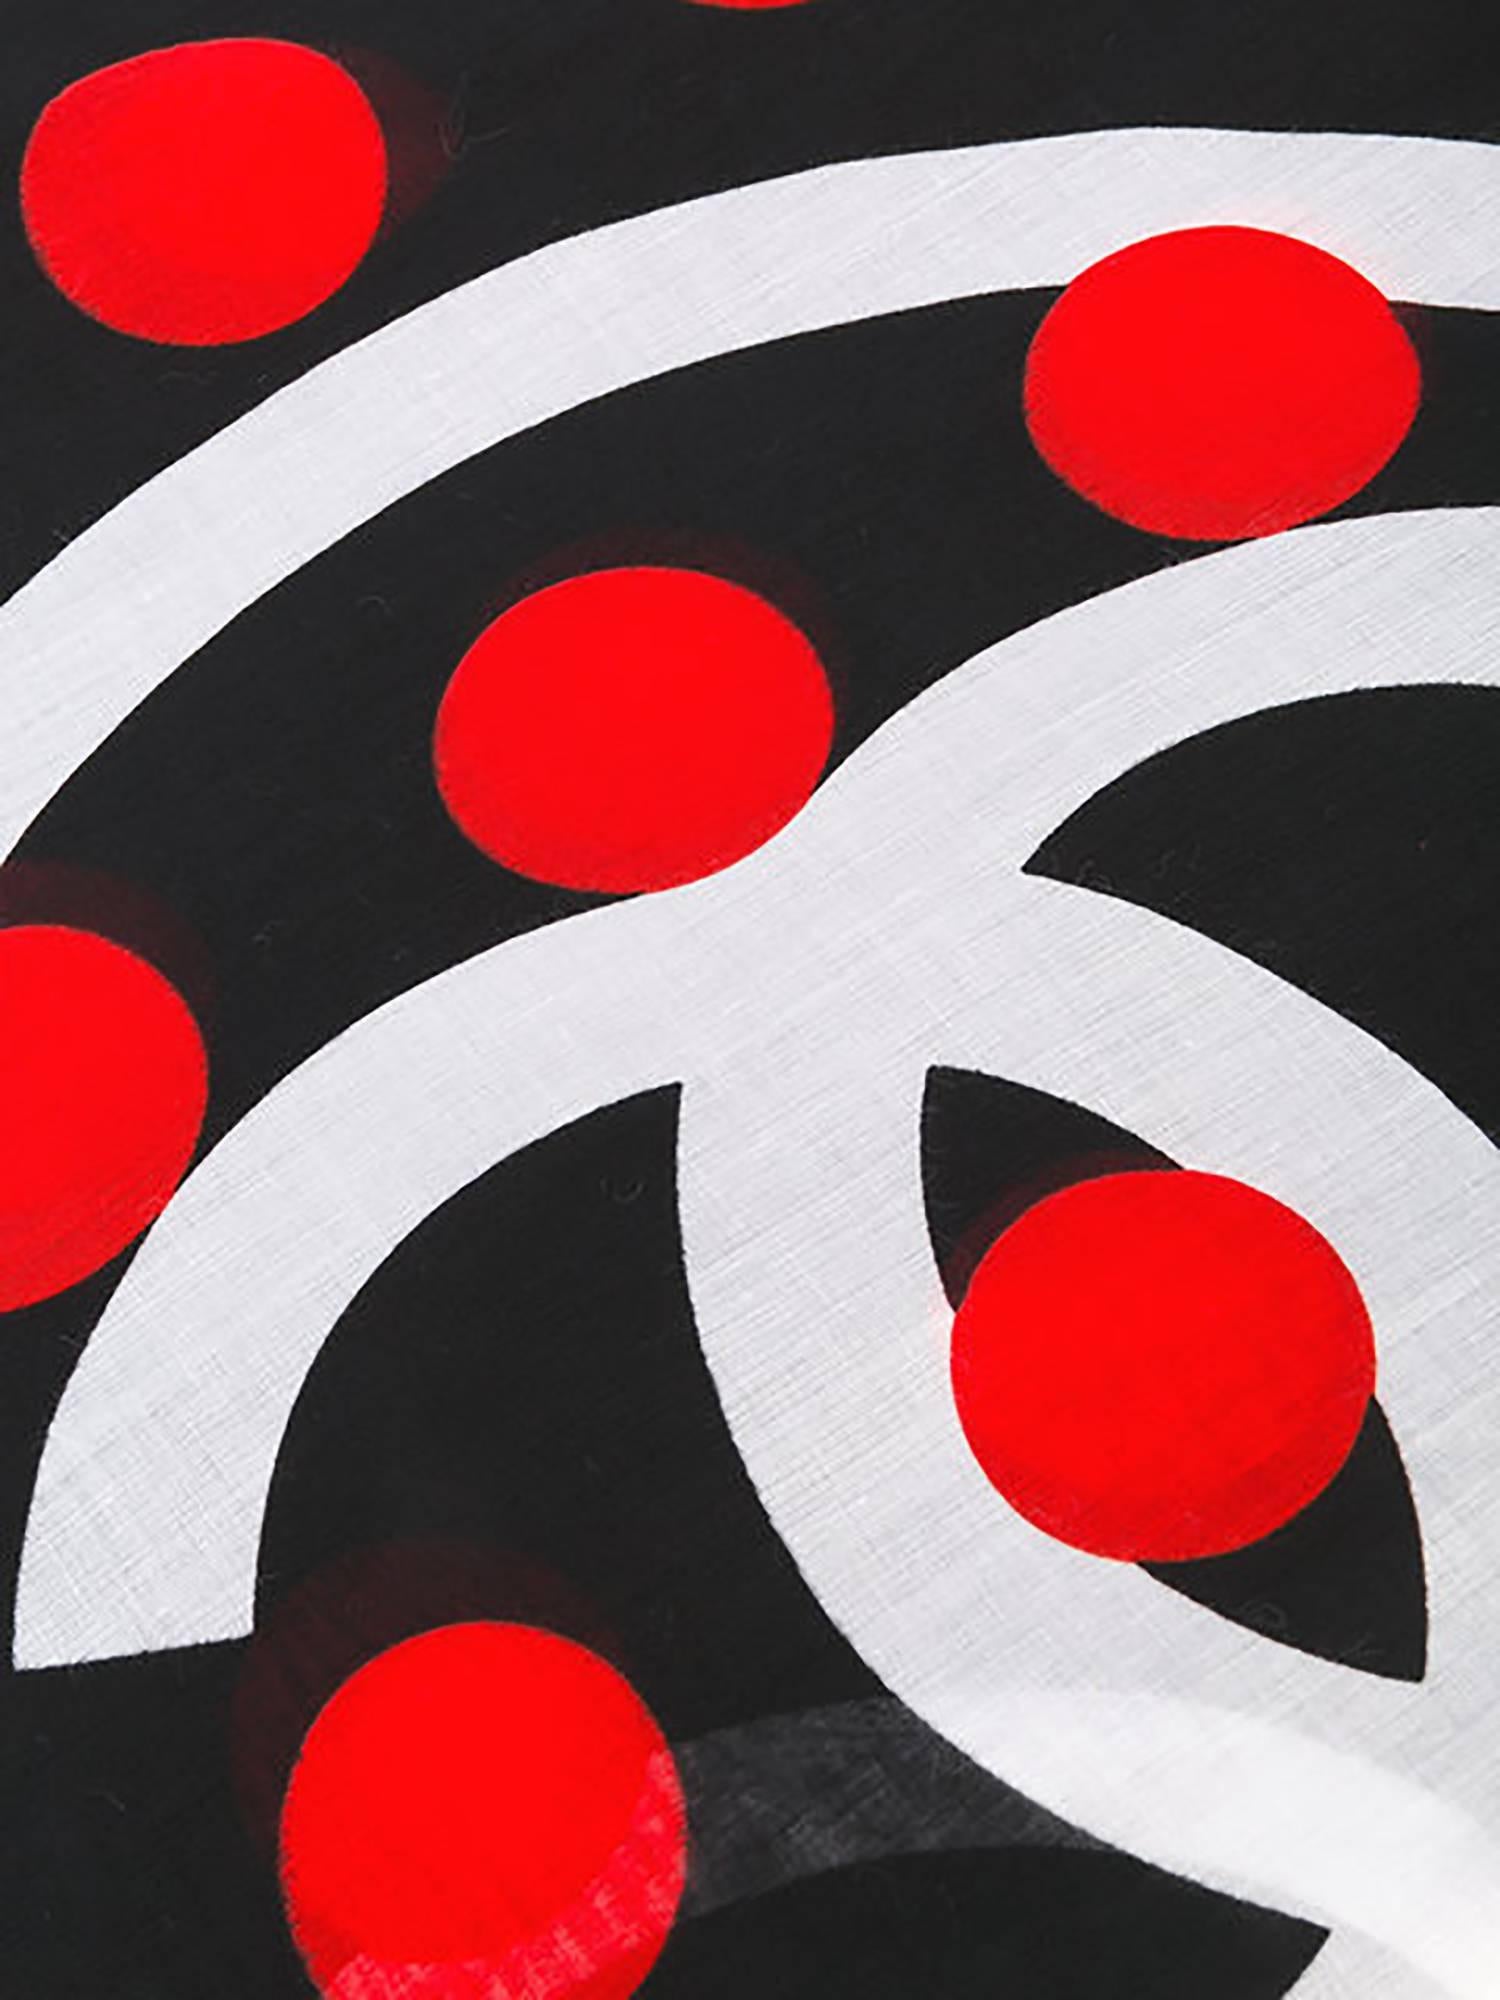 A graphic, vintage Chanel cotton scarf featuring large monograms offset with a grid of polka dots.

Colour: Black, Red, White

Material: 100% Cotton

Dimensions: L: 154cm, H: 98cm

Made in Italy.

Condition: Excellent vintage condition. Please note